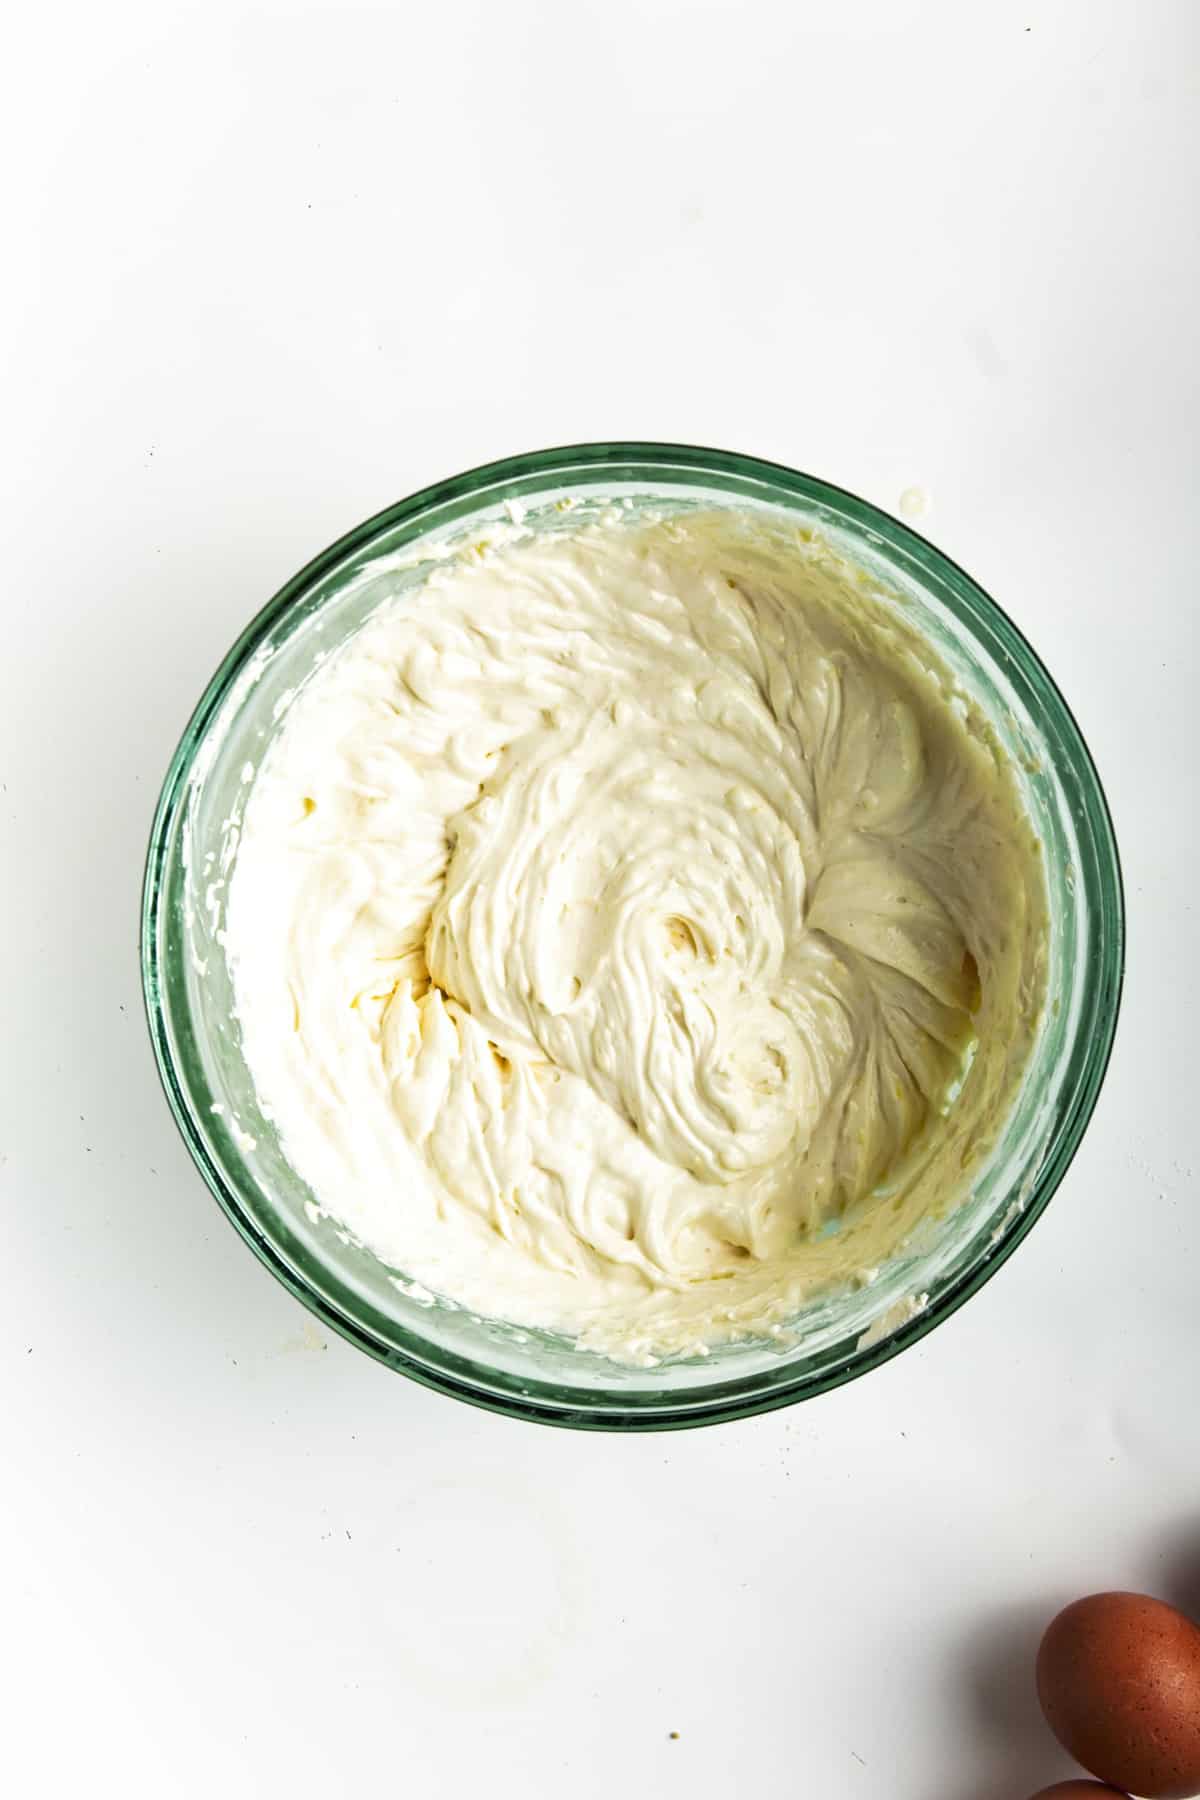 Cream cheese mixture in glass bowl.